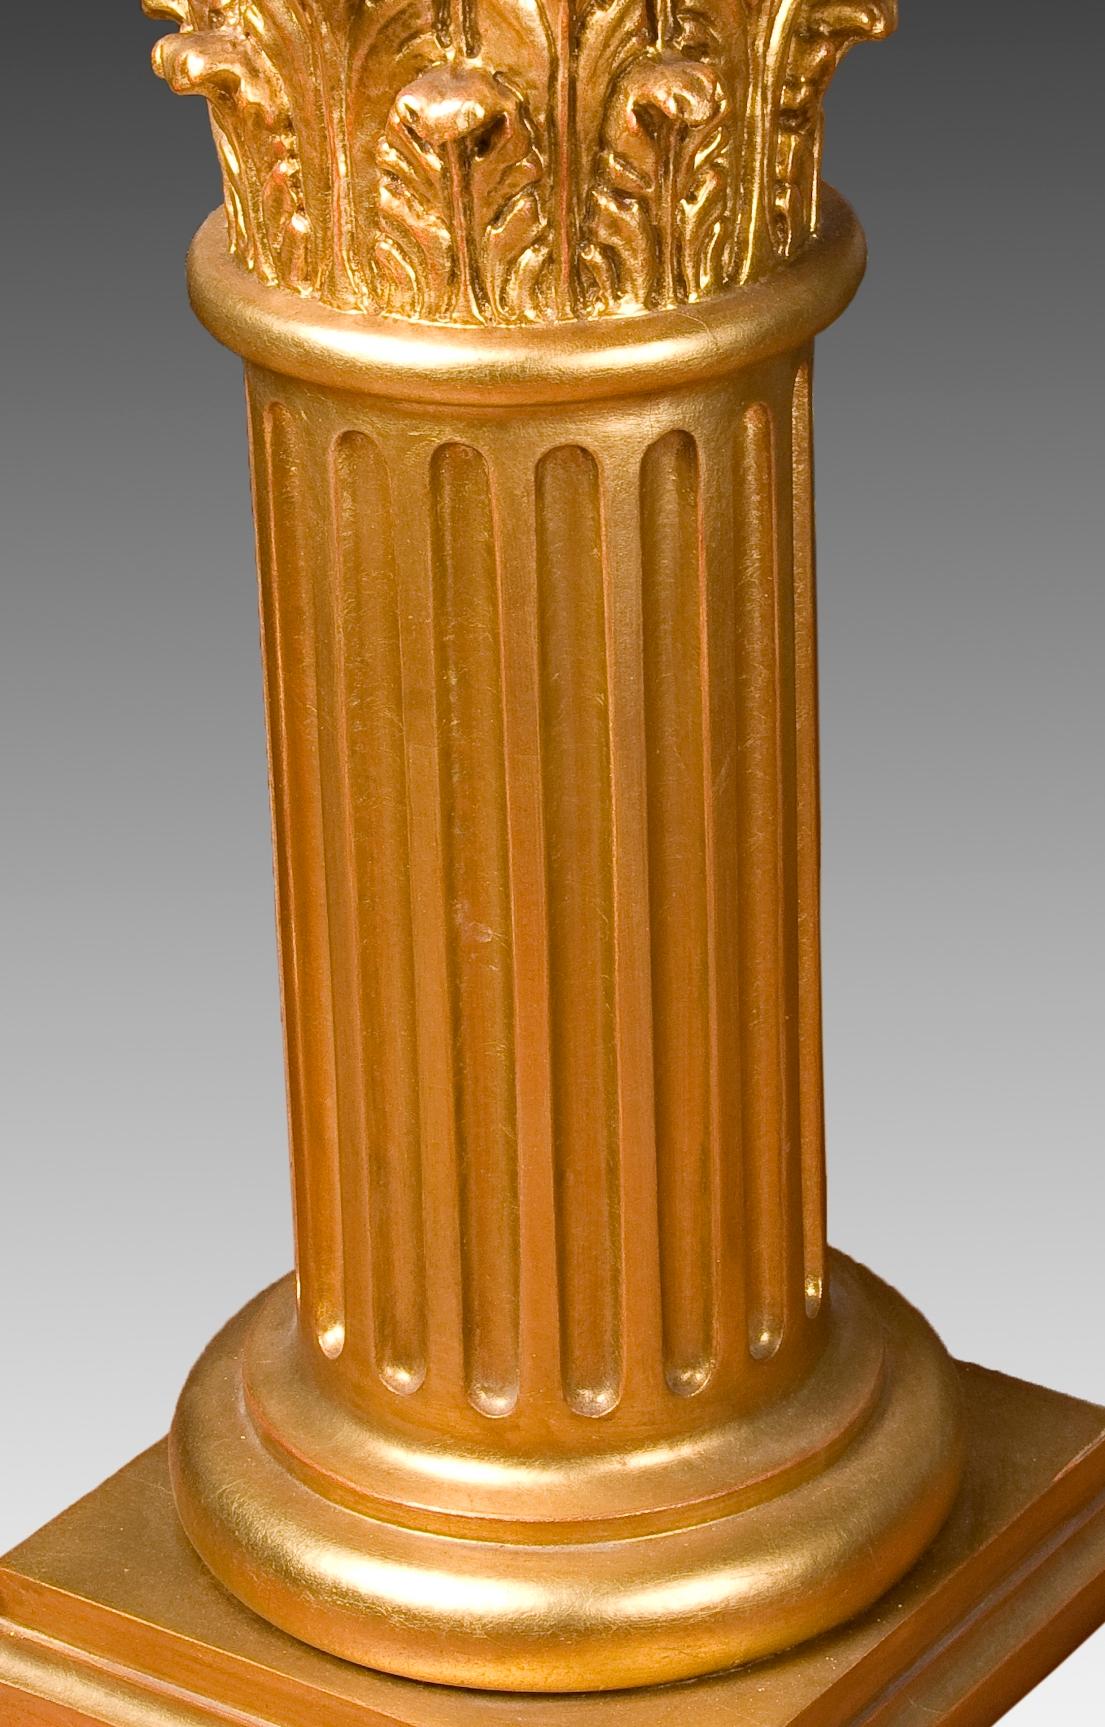 European Column-shaped base. Gilded wood. 20th century. For Sale